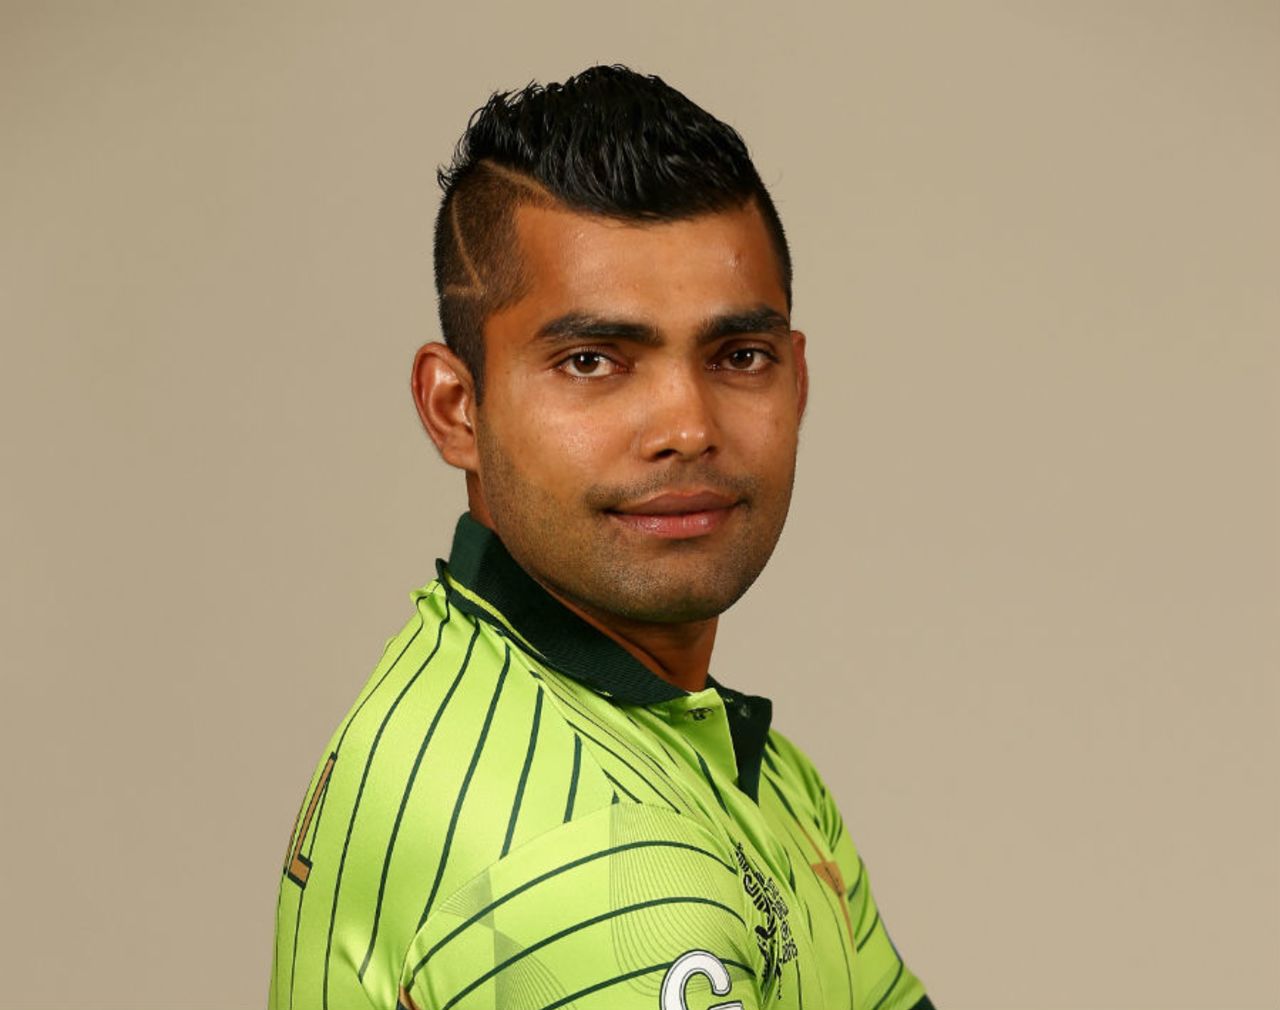 Umar Akmal poses for the player profile photograph before the start of the tournament, World Cup 2015, Sydney, February 8, 2015